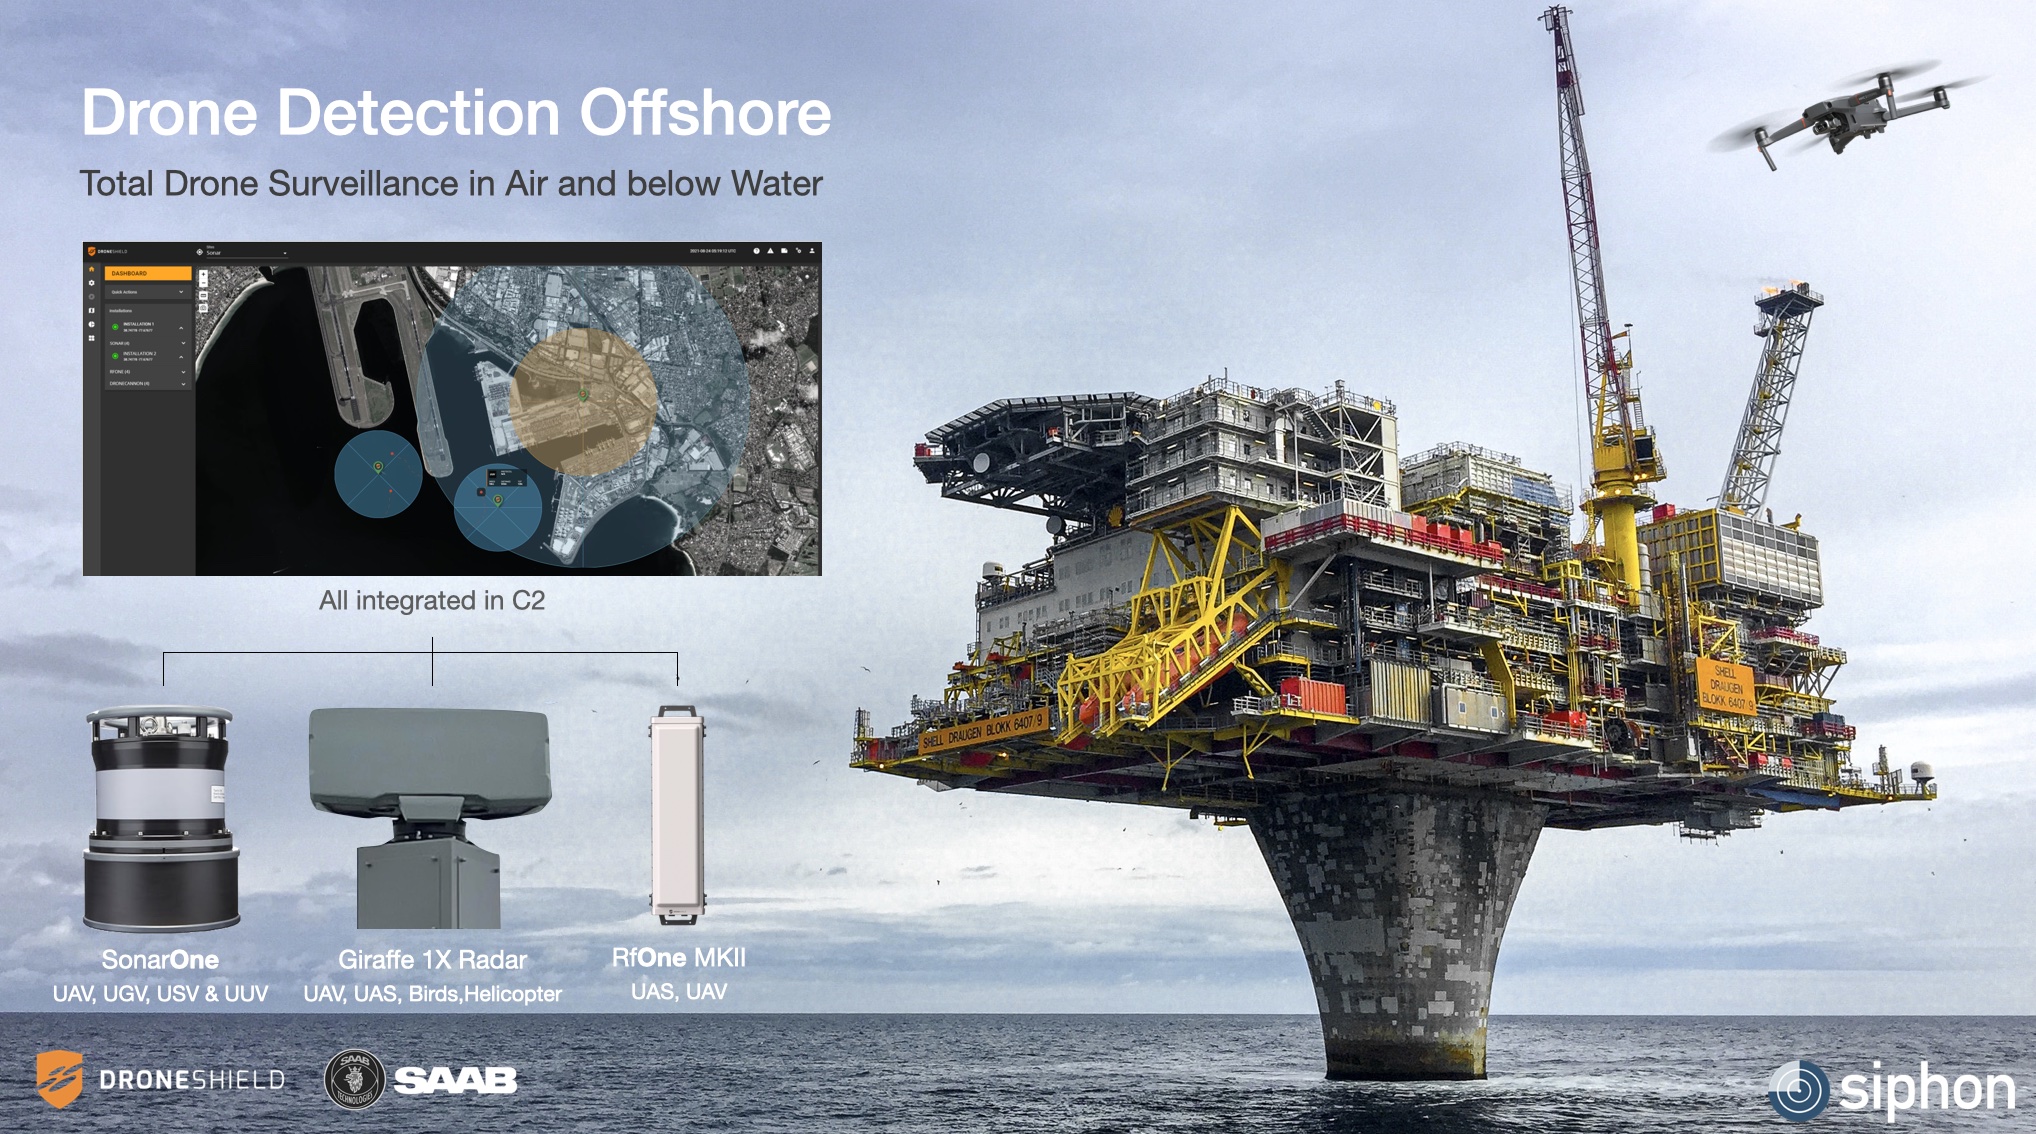 Drone Detection at Offshore Installations